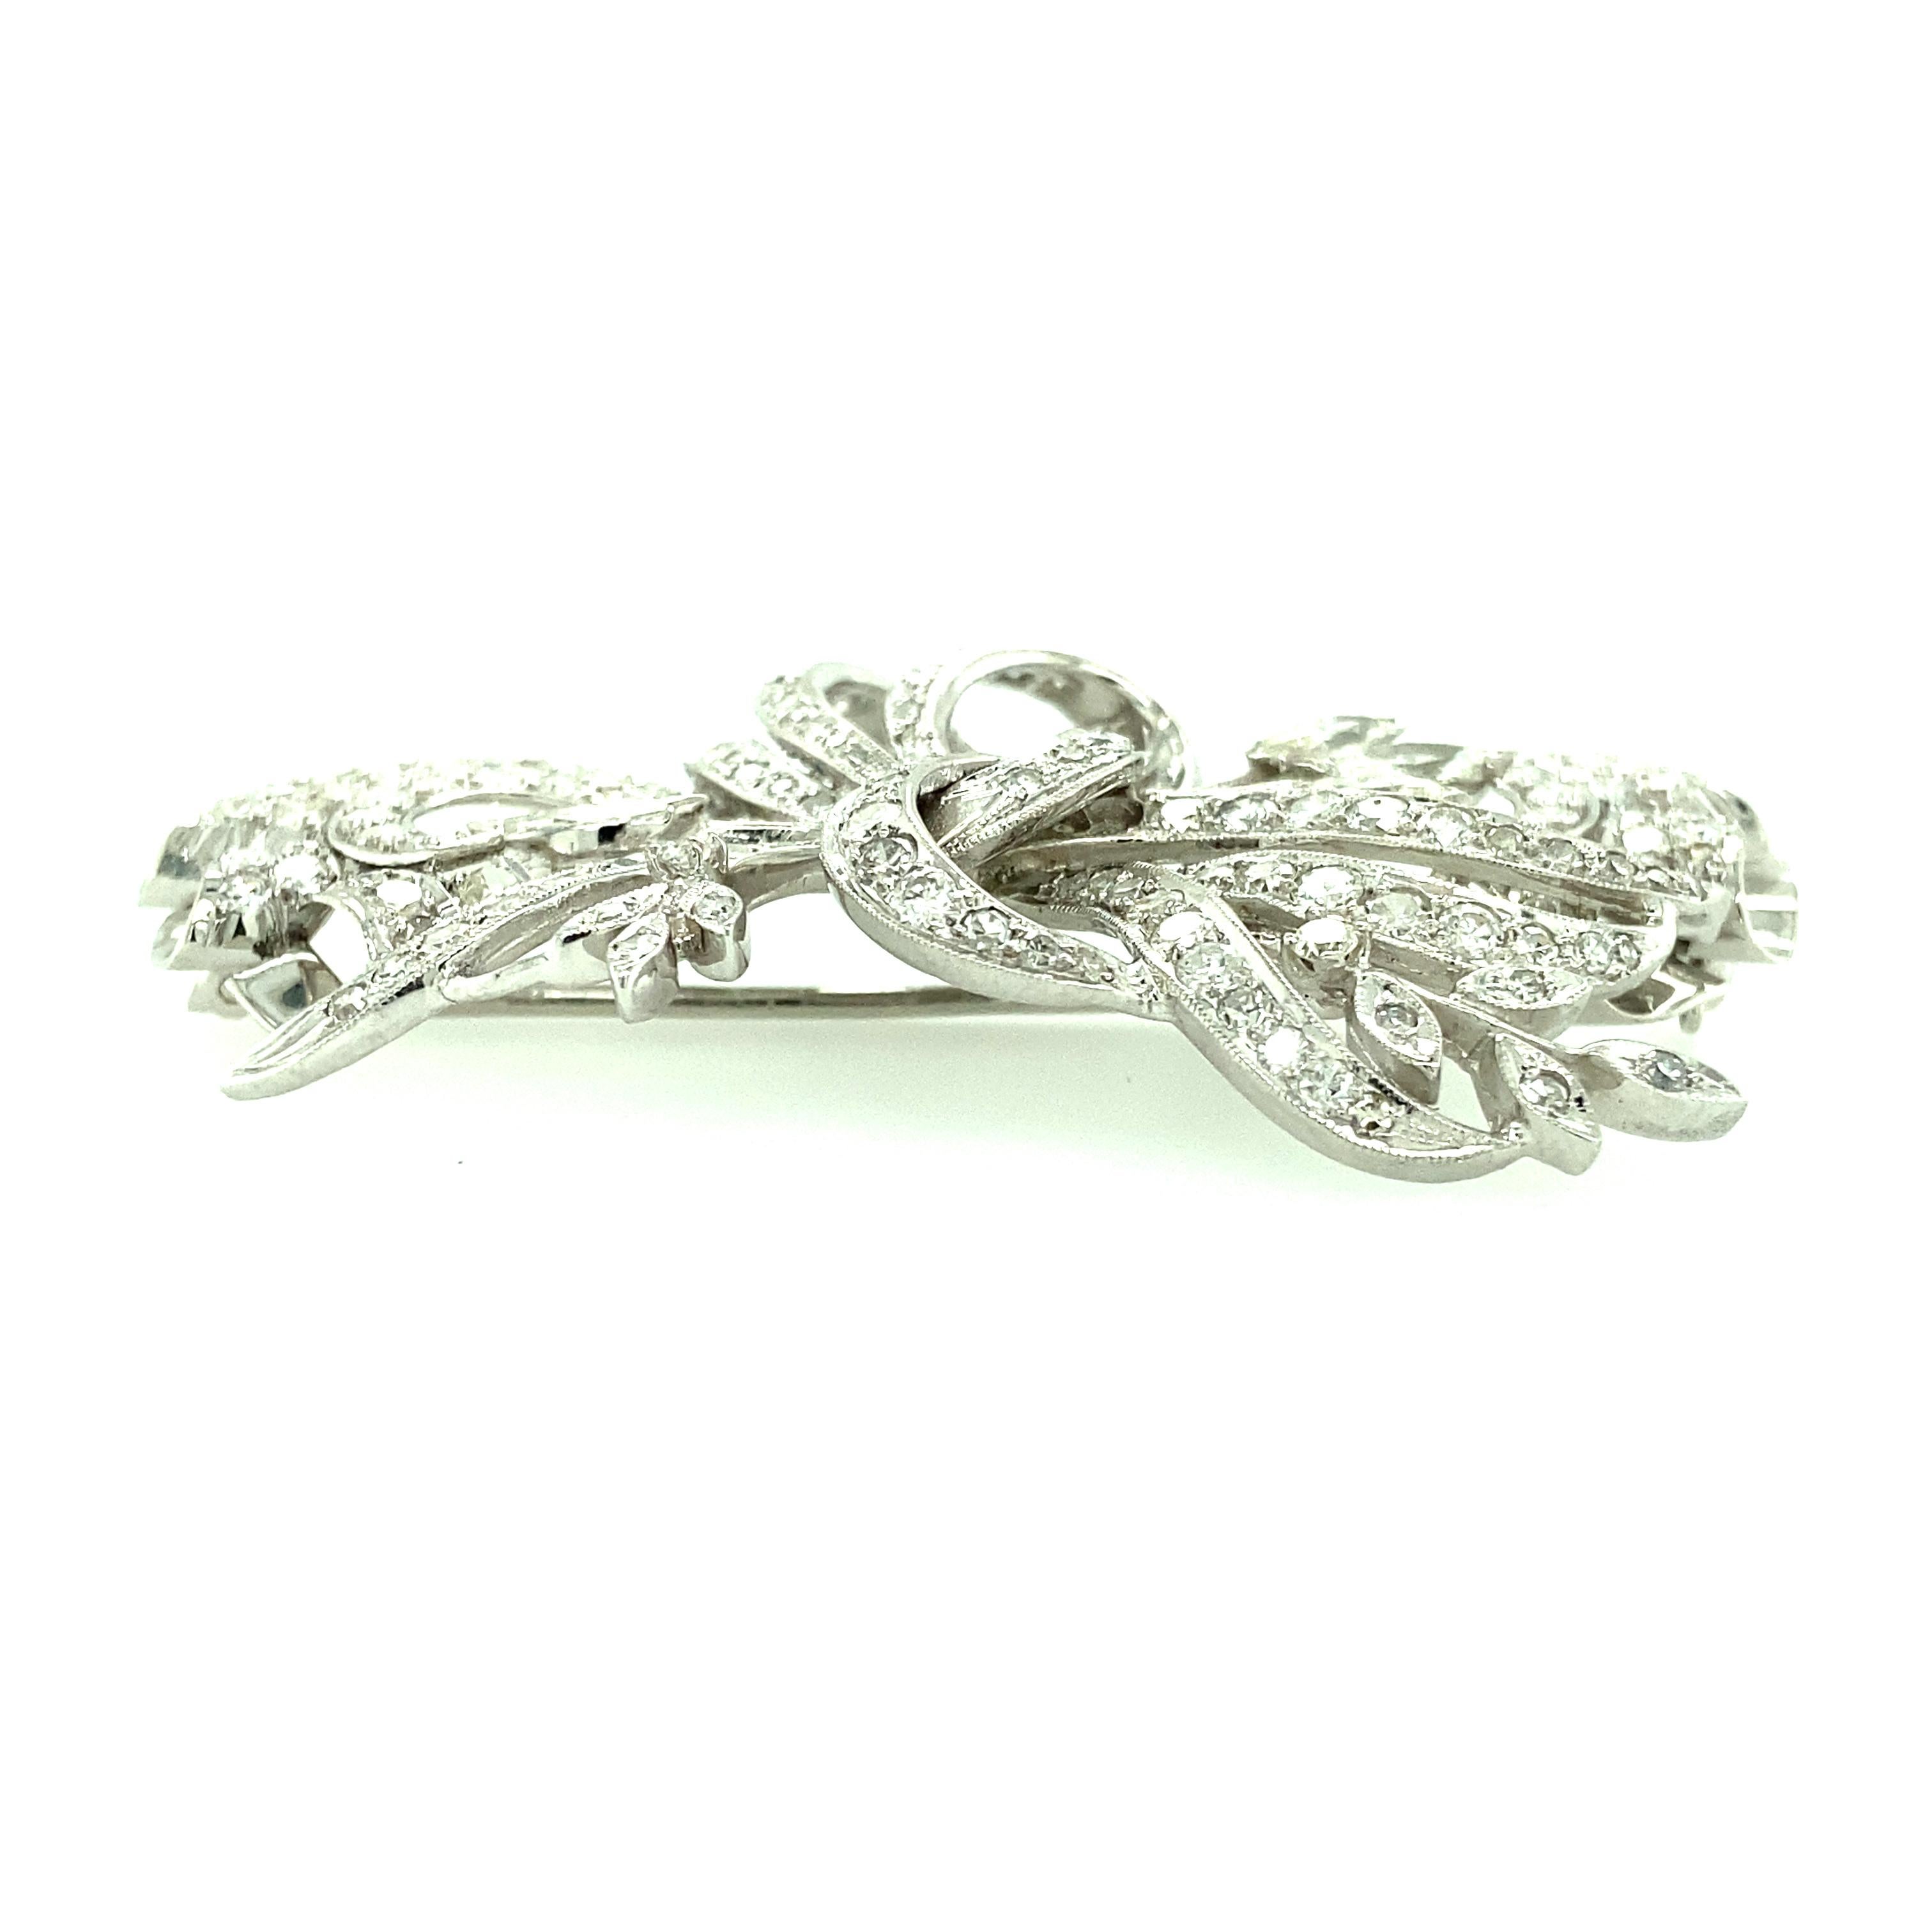 One platinum estate diamond brooch set with one hundred fifty-six brilliant cut diamonds 4.25 carat total weight with matching H/I color and SI clarity and four marquise cut diamonds 1.10 carat total weight with matching H/I color and SI clarity. 